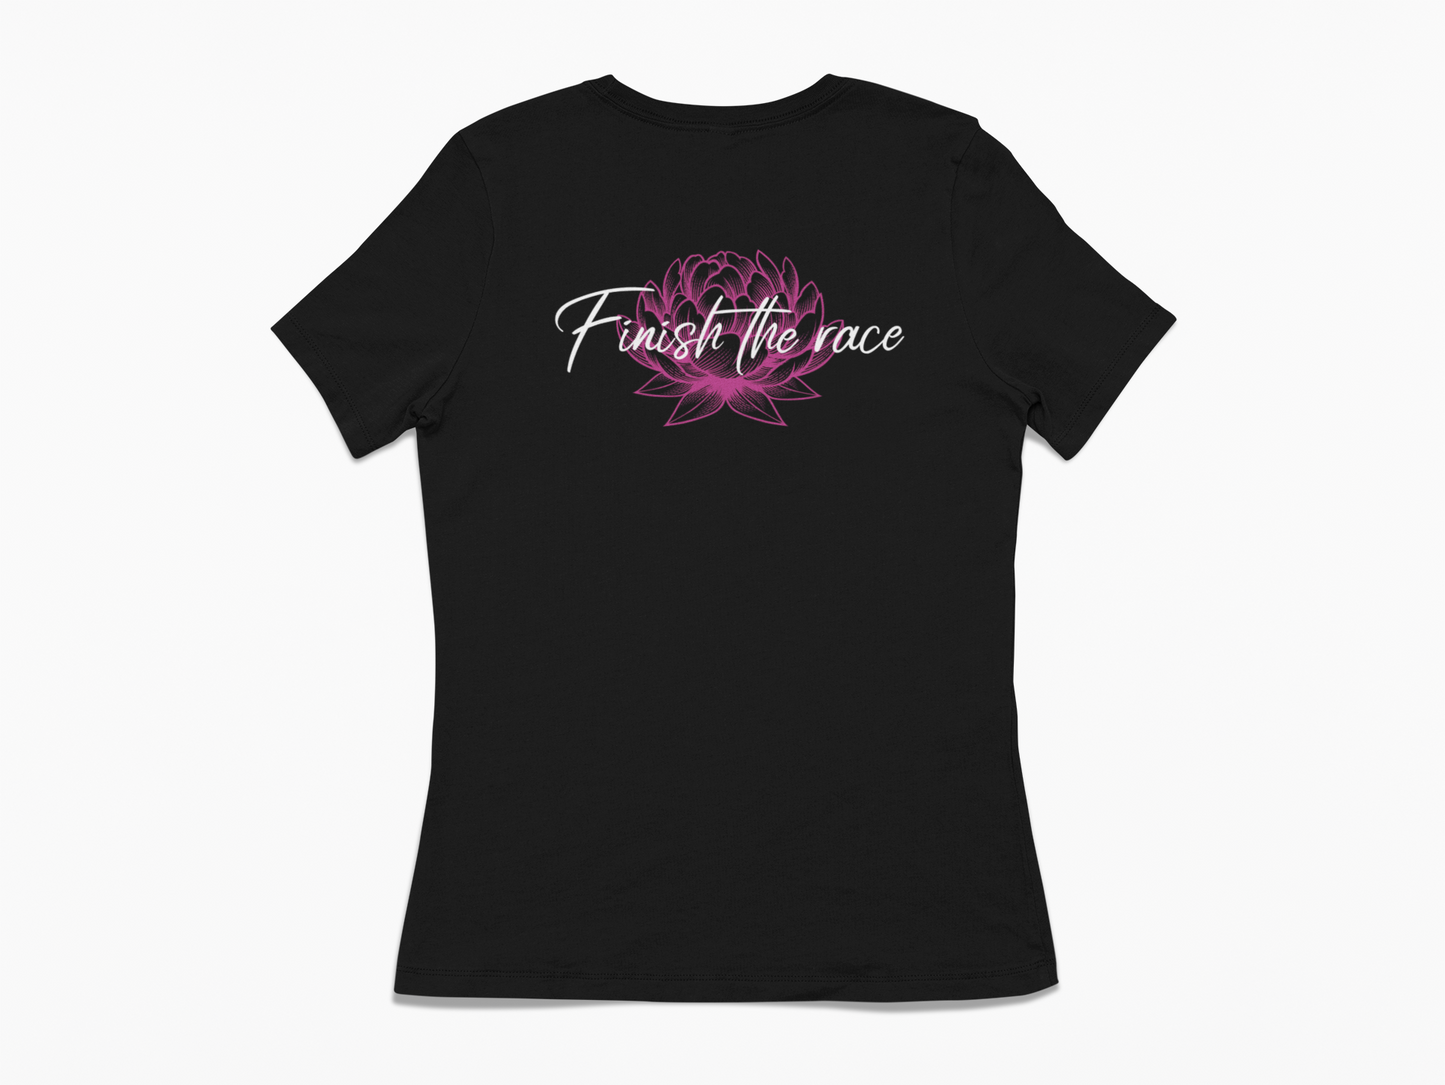 FTR Inspire: Women's Finish The Race Loose Fit Tee